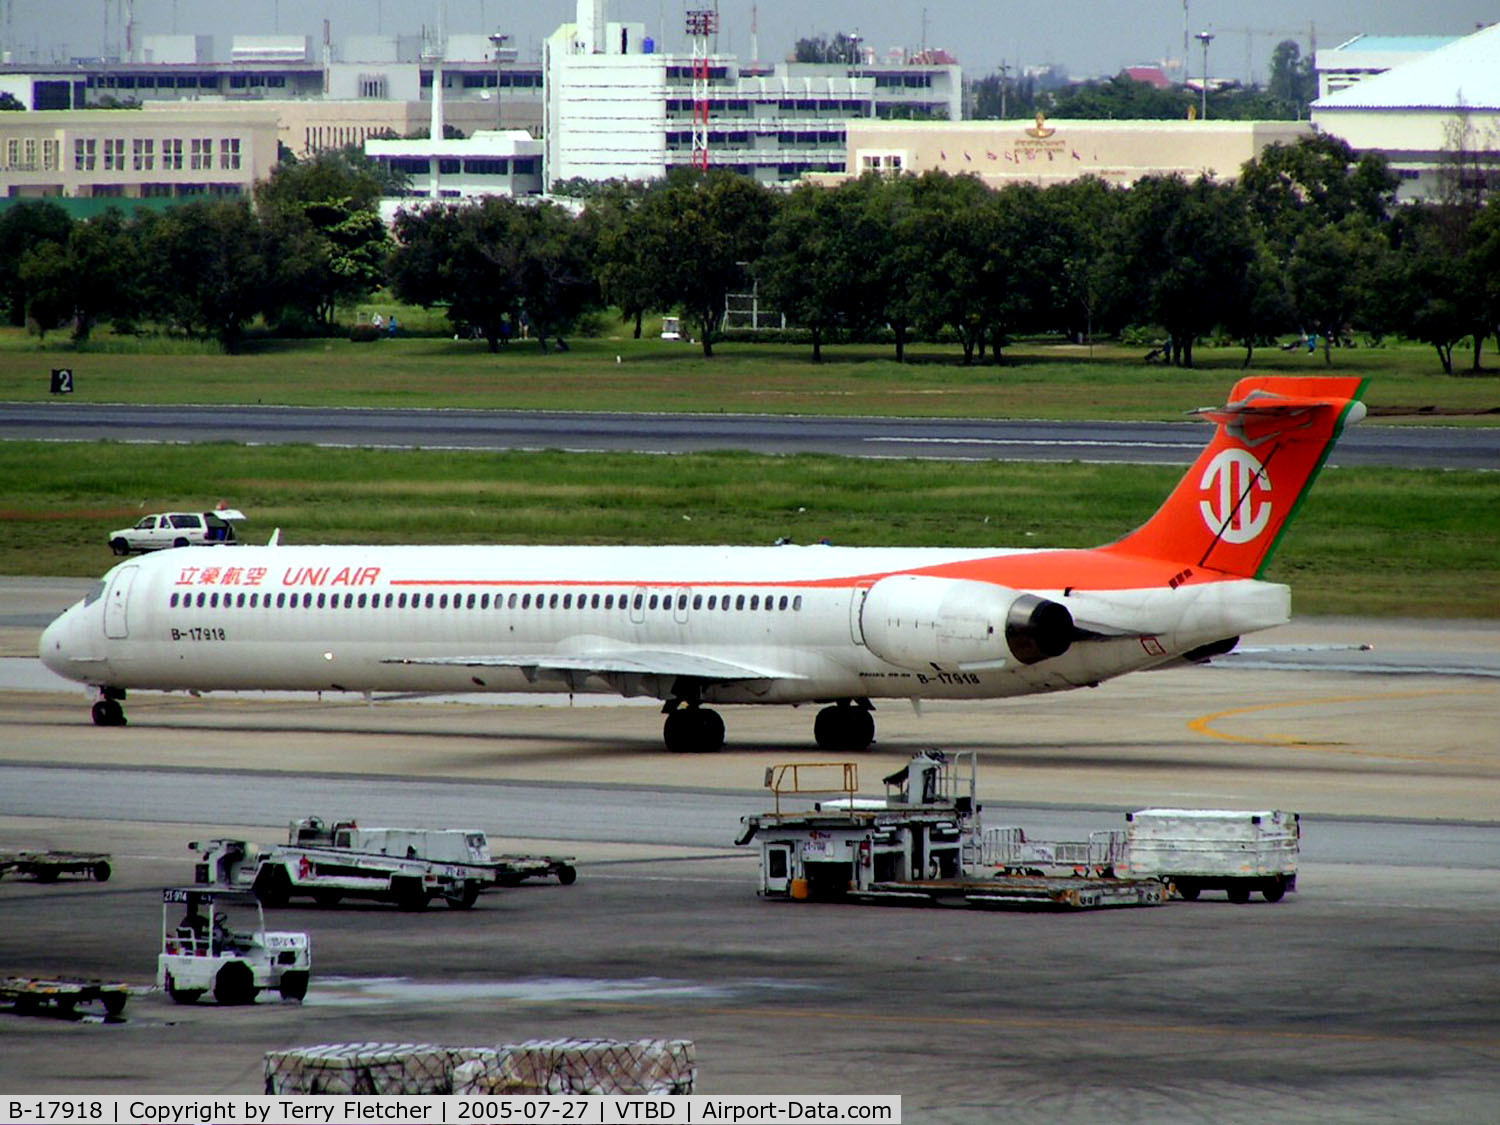 B-17918, 1997 McDonnell Douglas MD-90-30 C/N 53571/2193, Uni Air MD90 about to depart from the old Bangkok Don Muang Airport